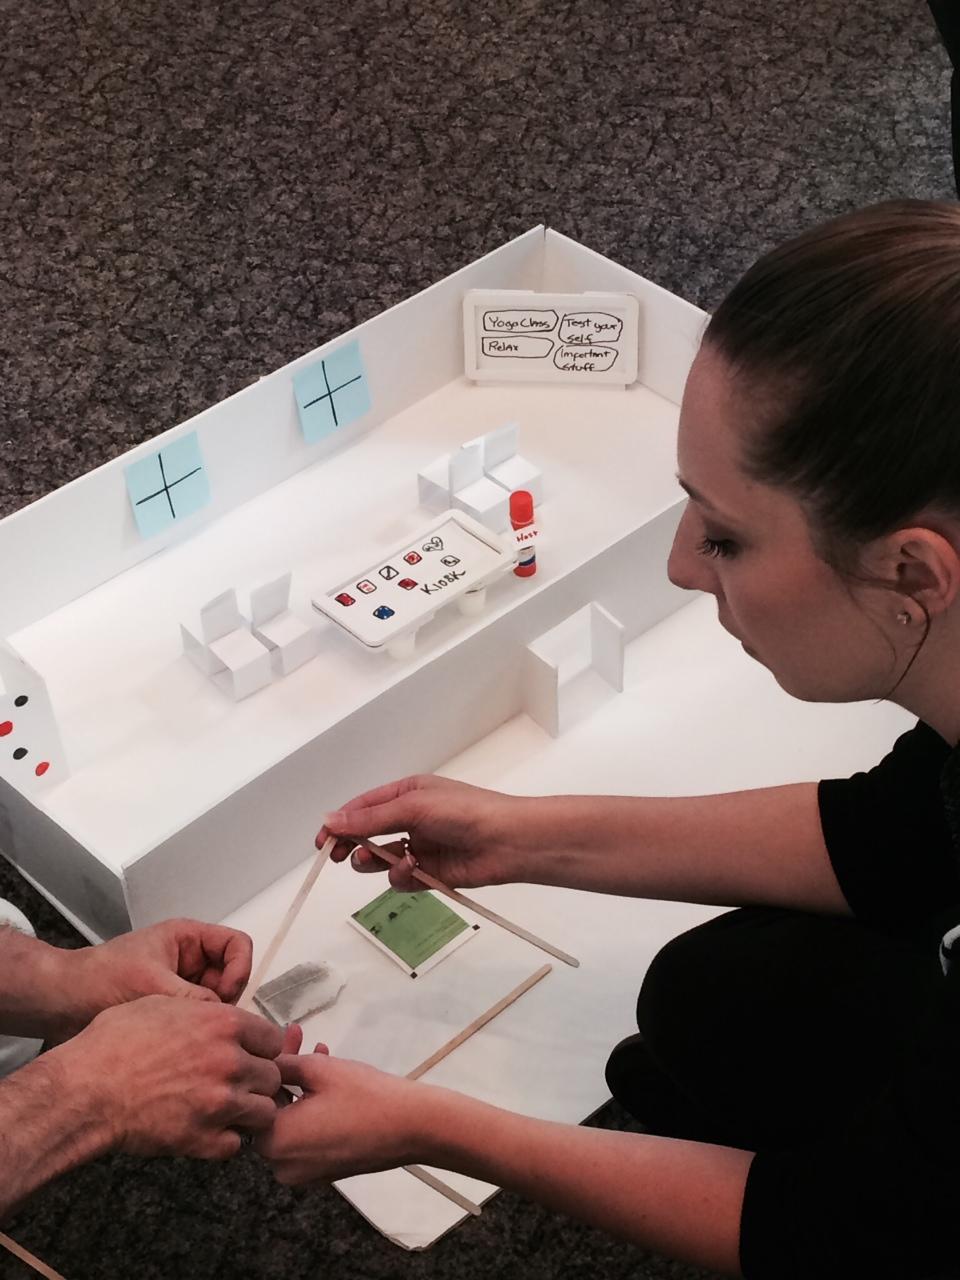 Building a physical prototype allows you and/or your team to tangibly explore, understand